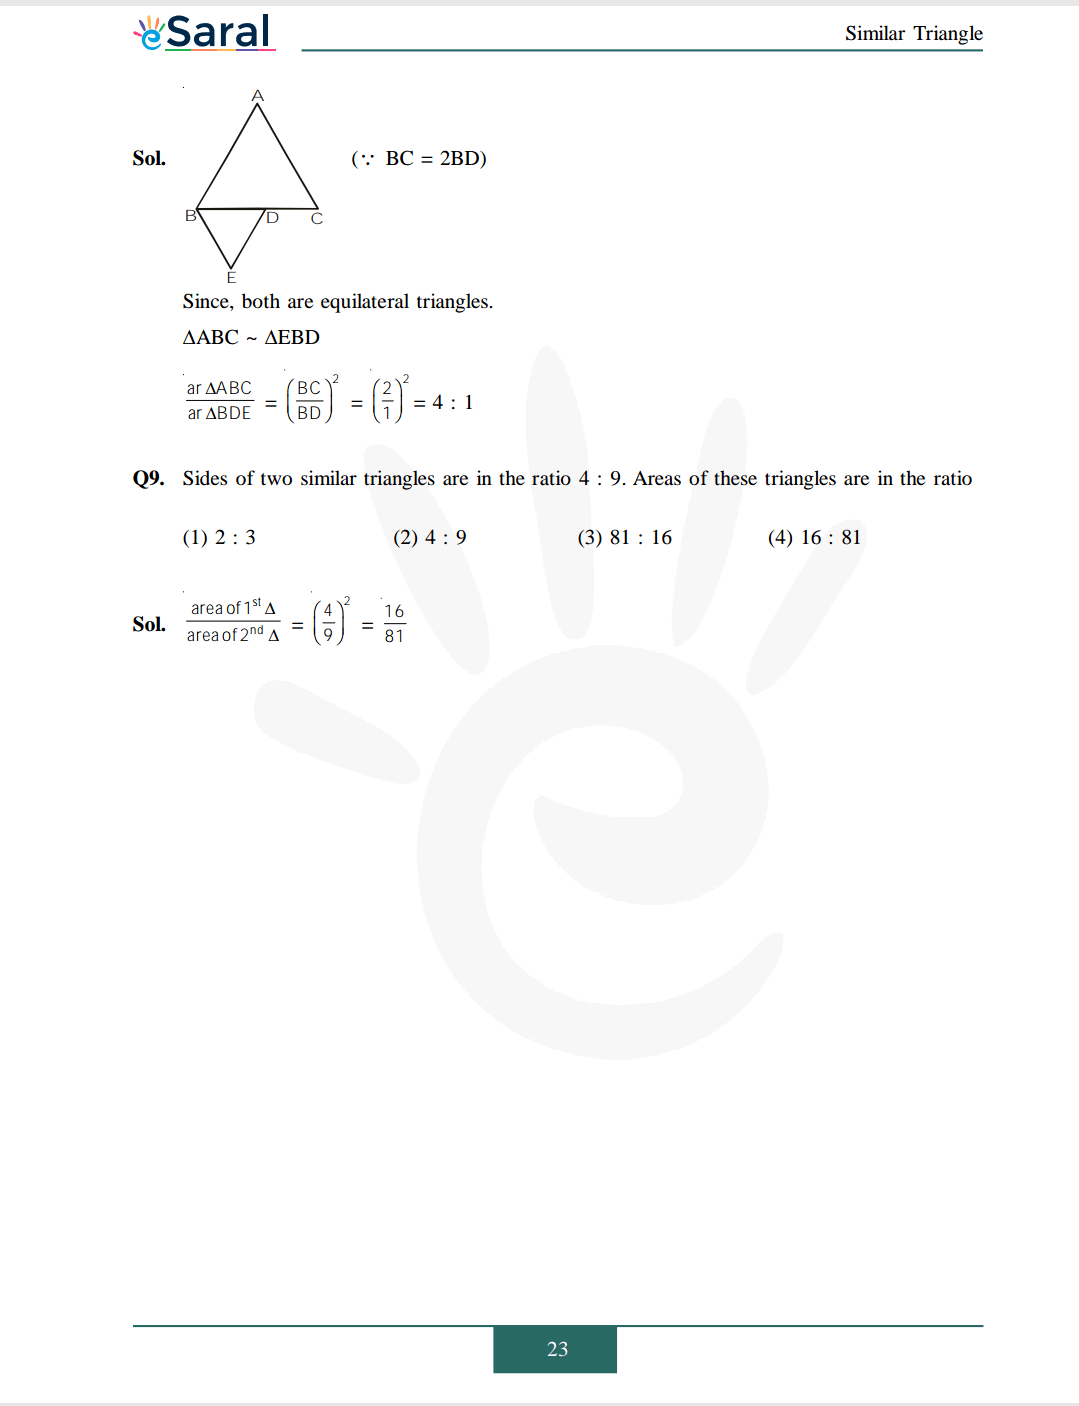 Class 10 Maths Chapter 6 exercise 6.4 solutions Image 5